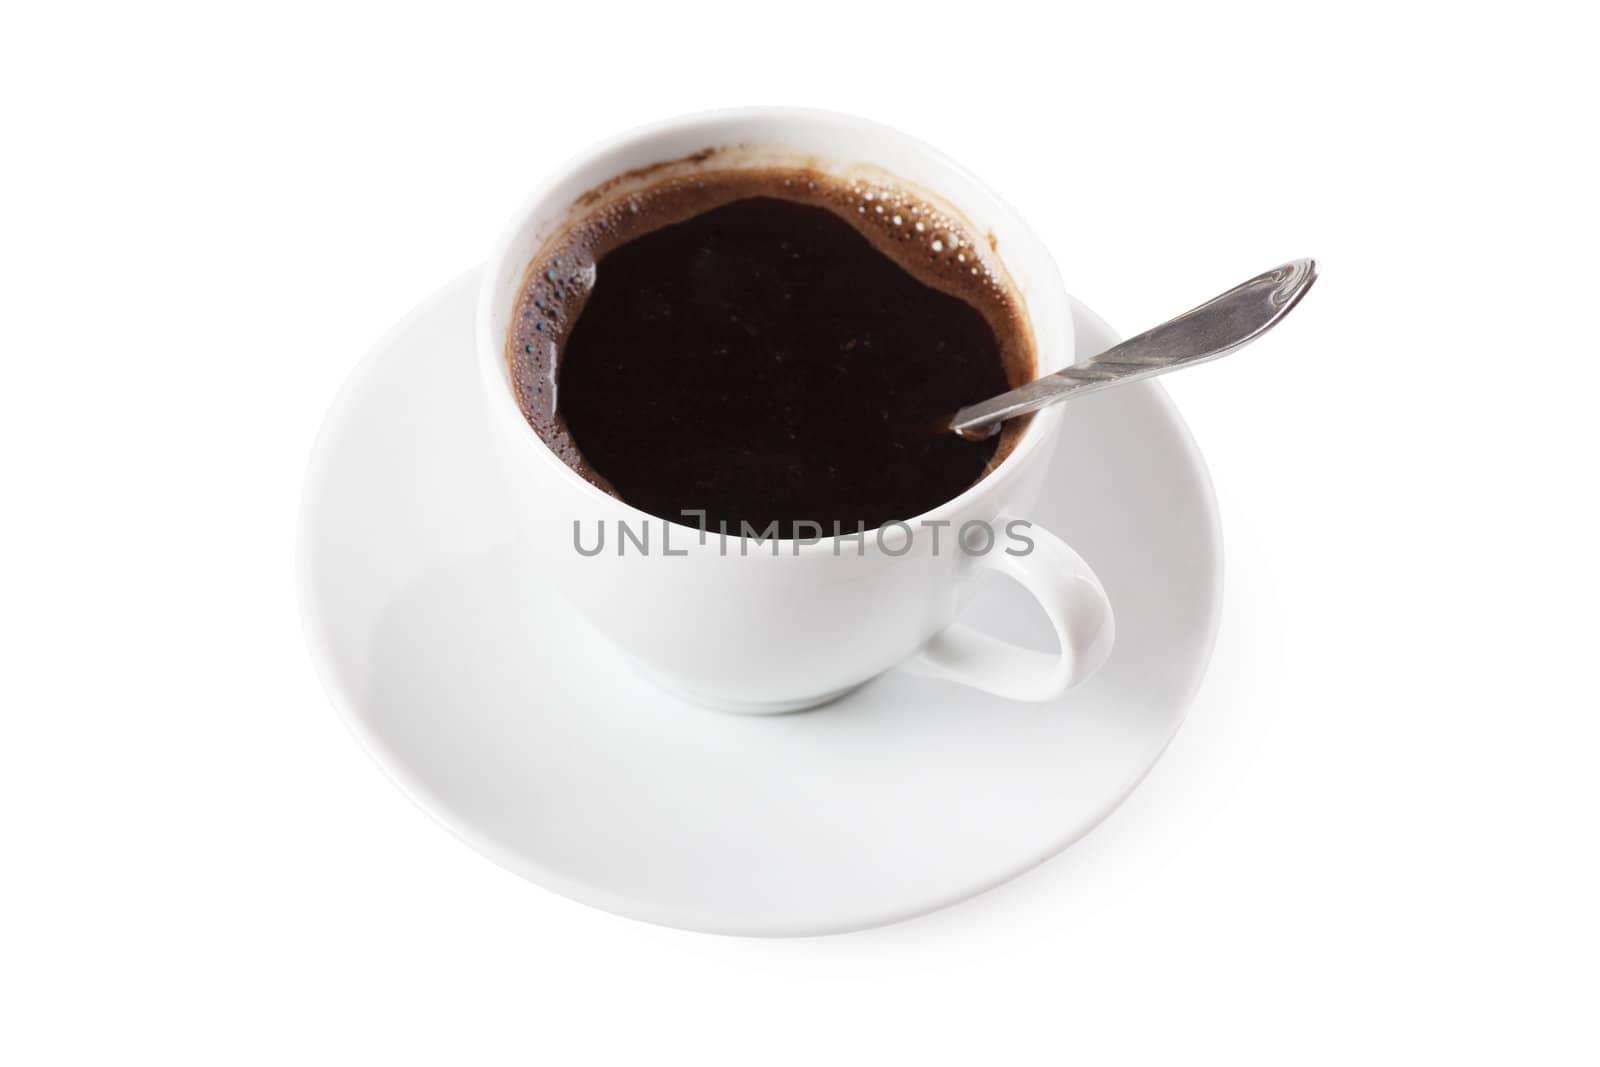 White cup of coffee with spoon over white background